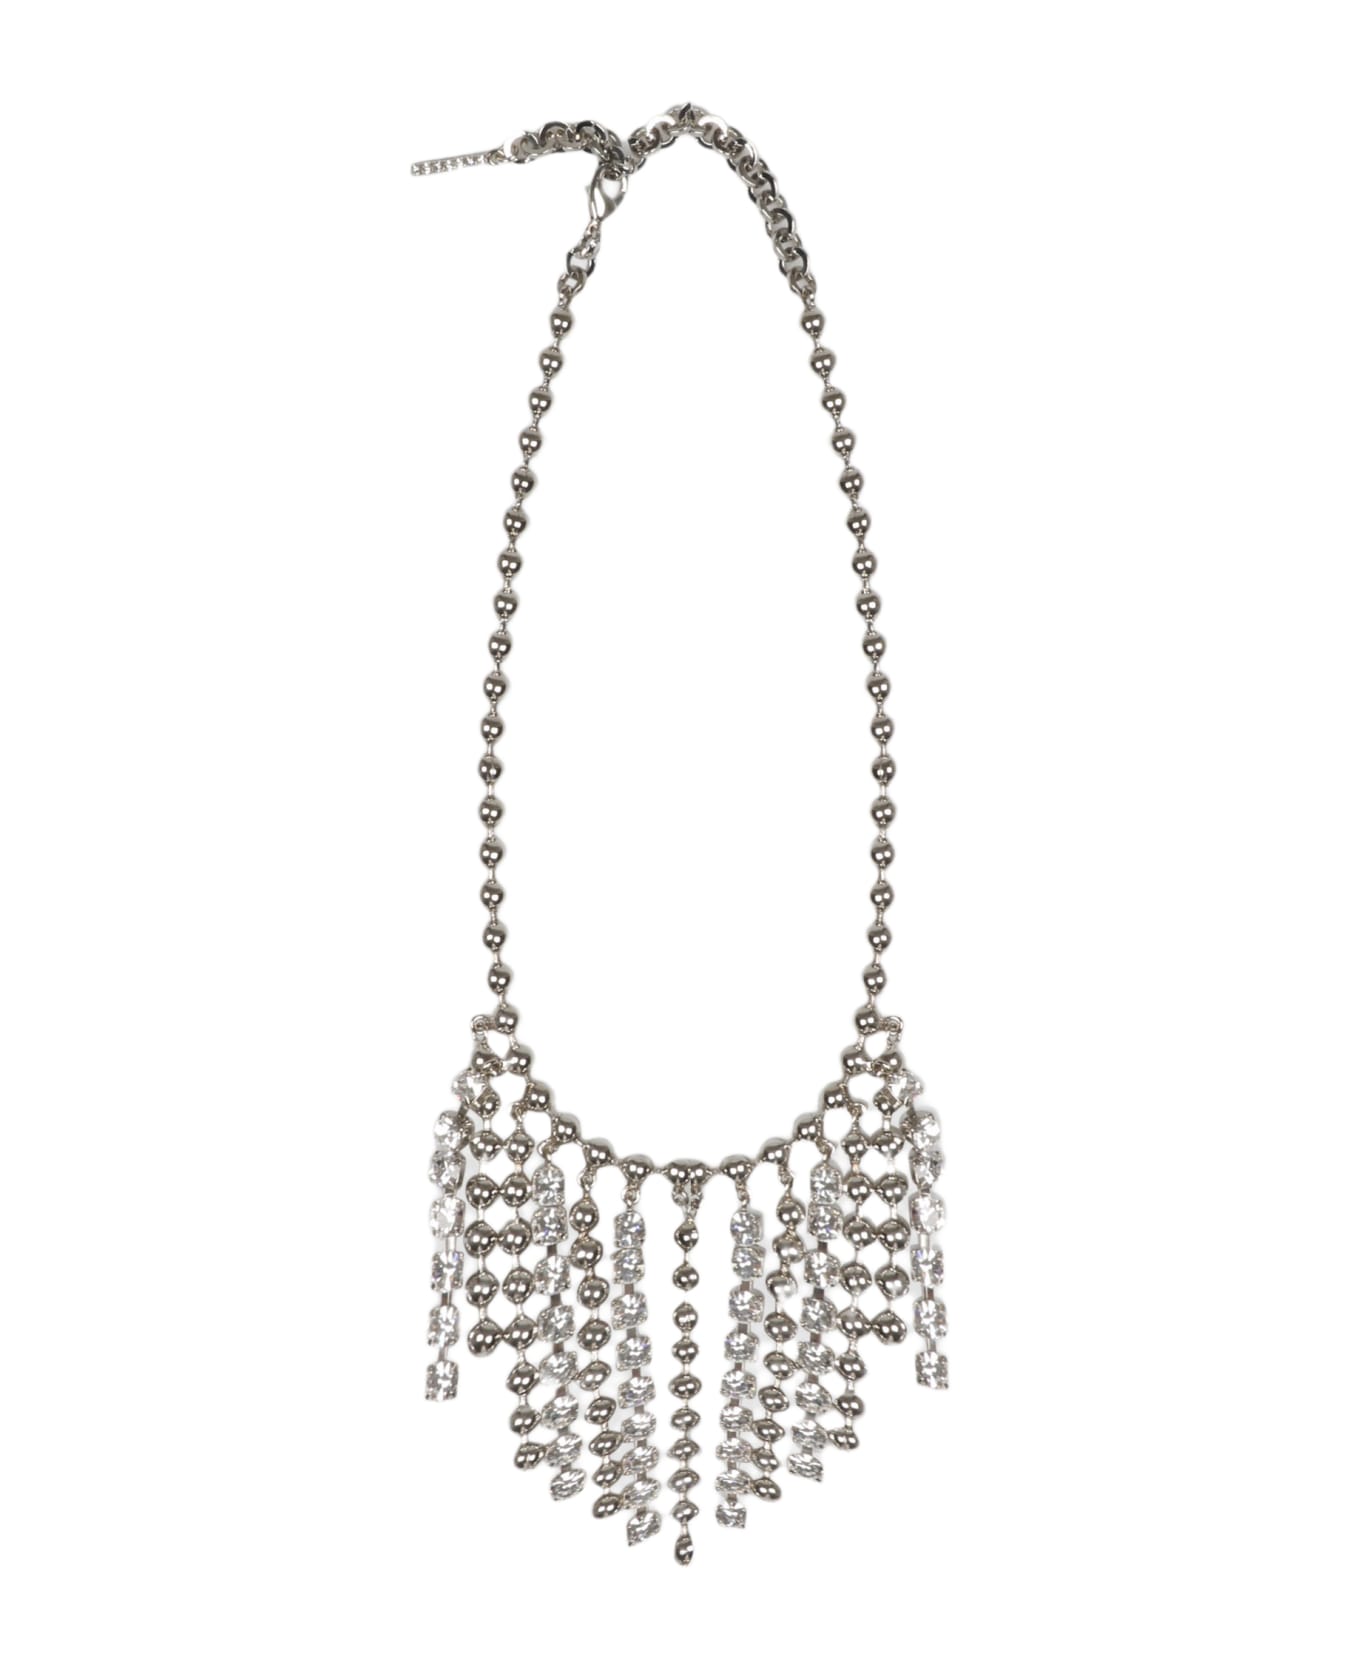 Alessandra Rich Crystal And Chain Fringes Necklace - Metallic